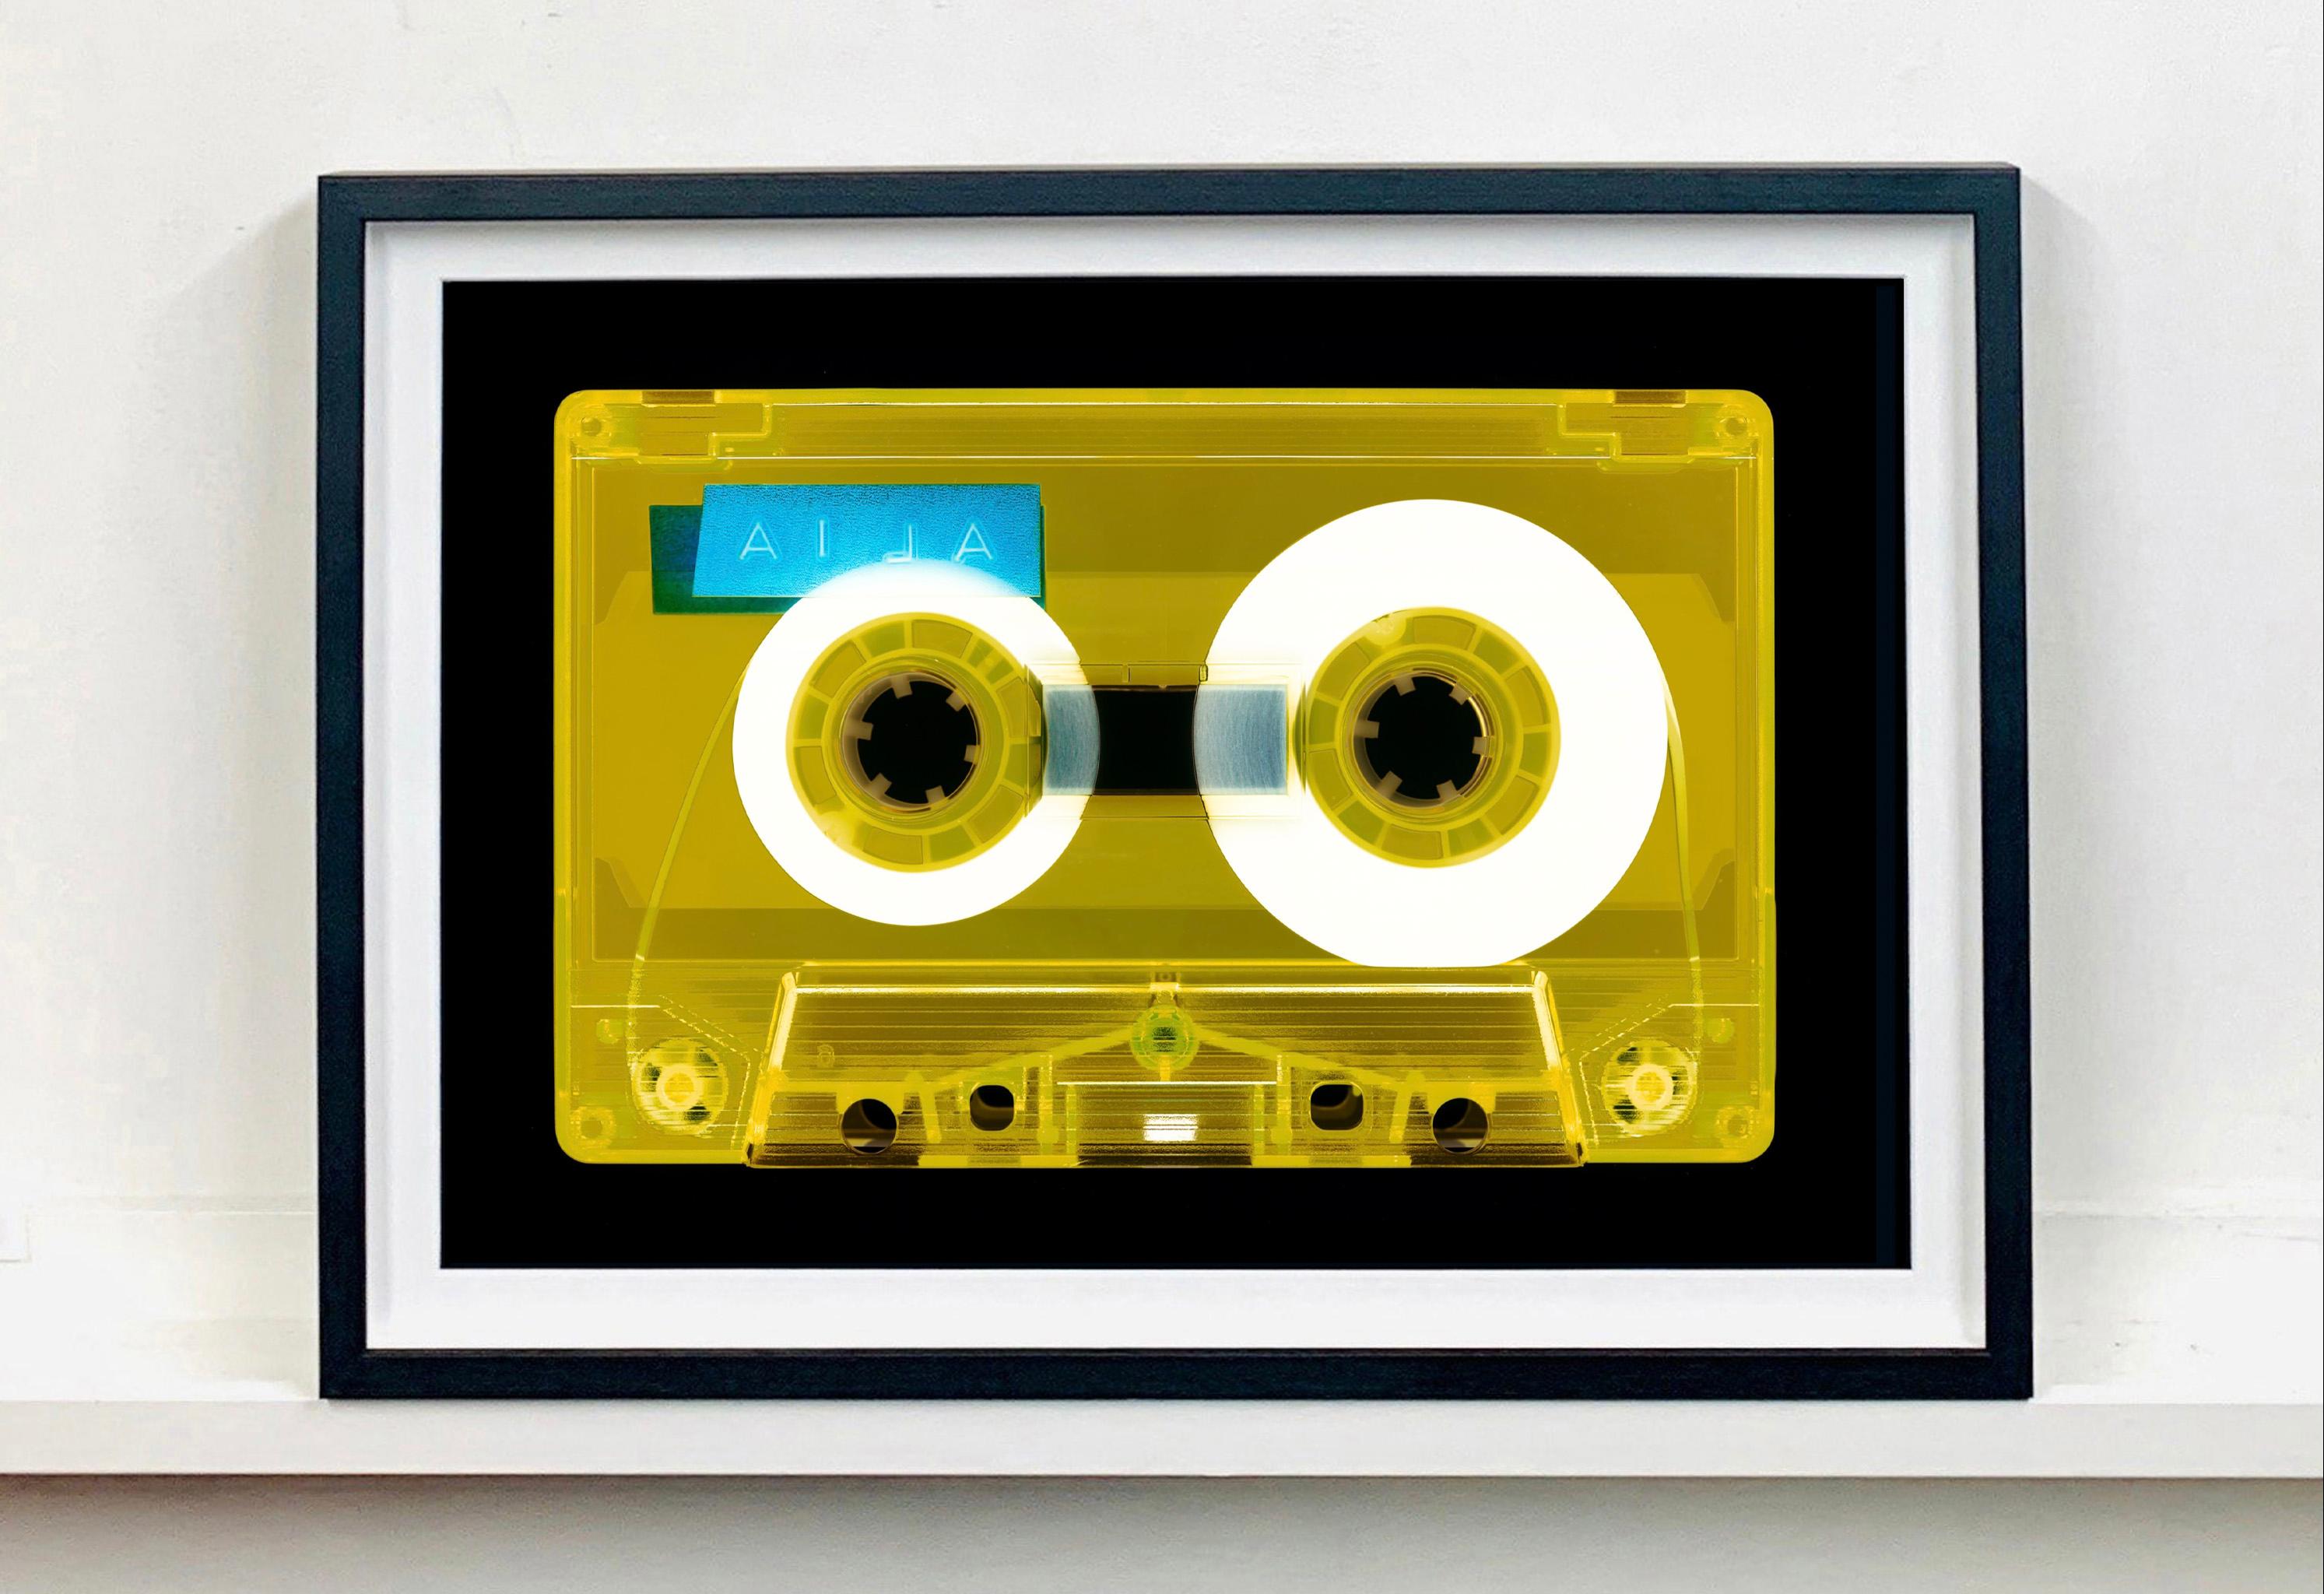 Tape Collection, AILA (Yellow) - Contemporary Pop Art Color Photography - Print by Heidler & Heeps